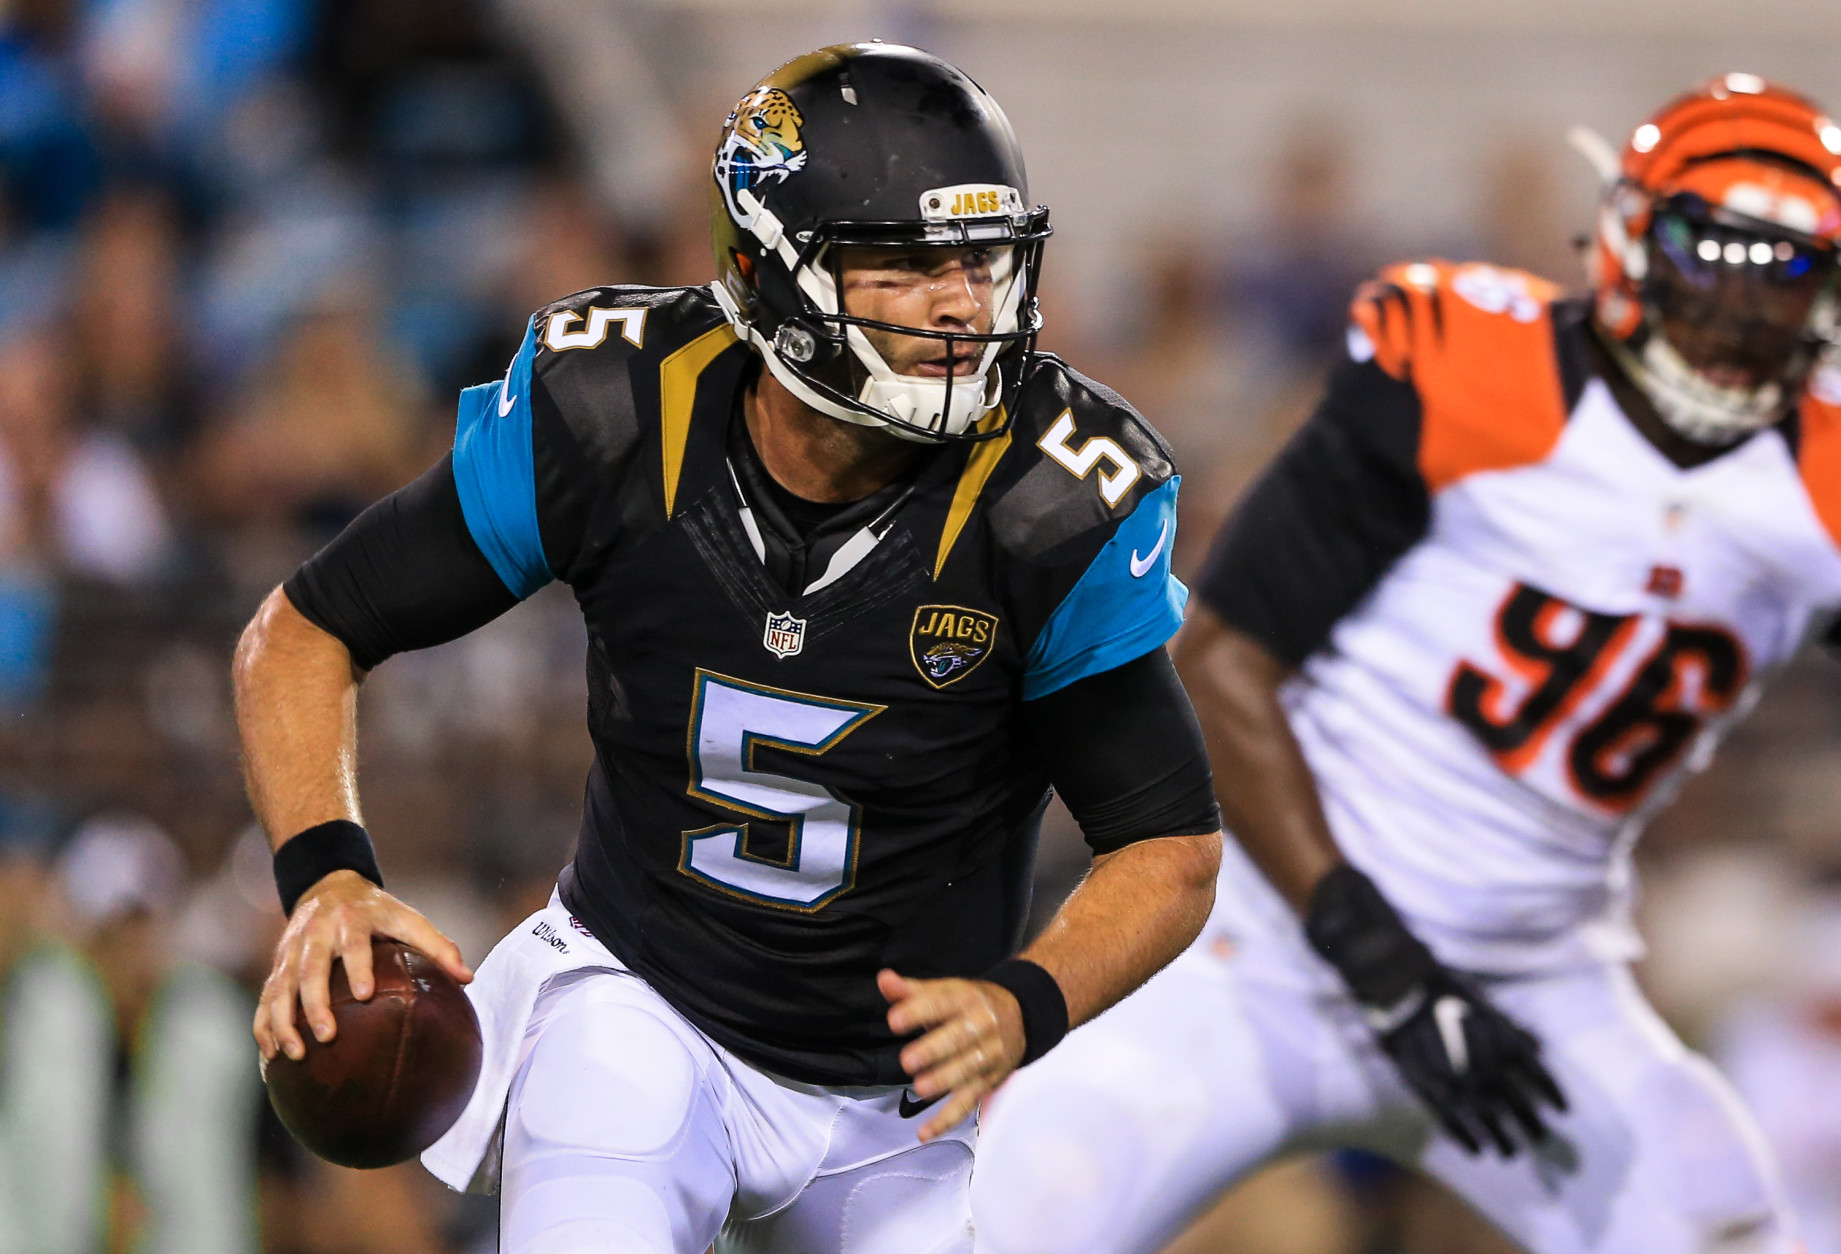 JACKSONVILLE, FL - AUGUST 28: Blake Bortles #5 of the Jacksonville Jaguars scrambles out of the pocket during the first quarter of the preseason game against the Cincinnati Bengals at EverBank Field on August 28, 2016 in Jacksonville, Florida. (Photo by Rob Foldy/Getty Images)